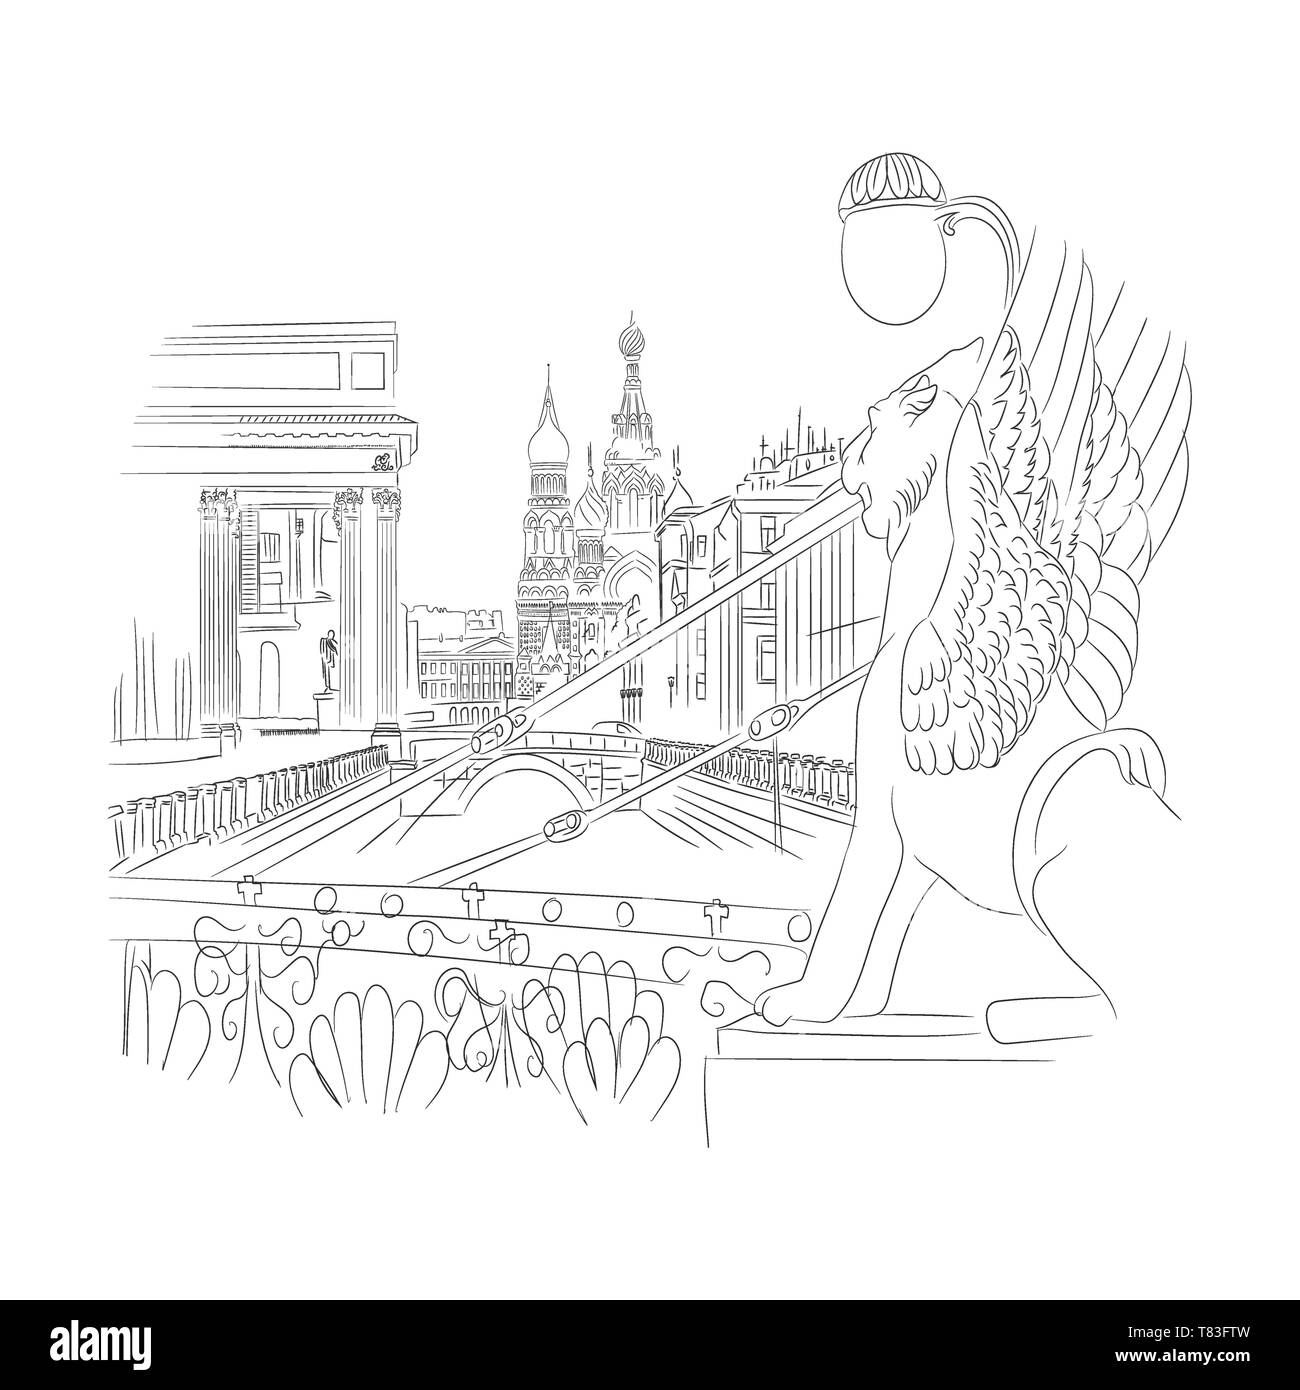 Winged lion silhouette St. Petersburg landmark Russia, Vector hand drawn engraved illustration,ink sketch isolated on white background, decorative Stock Vector